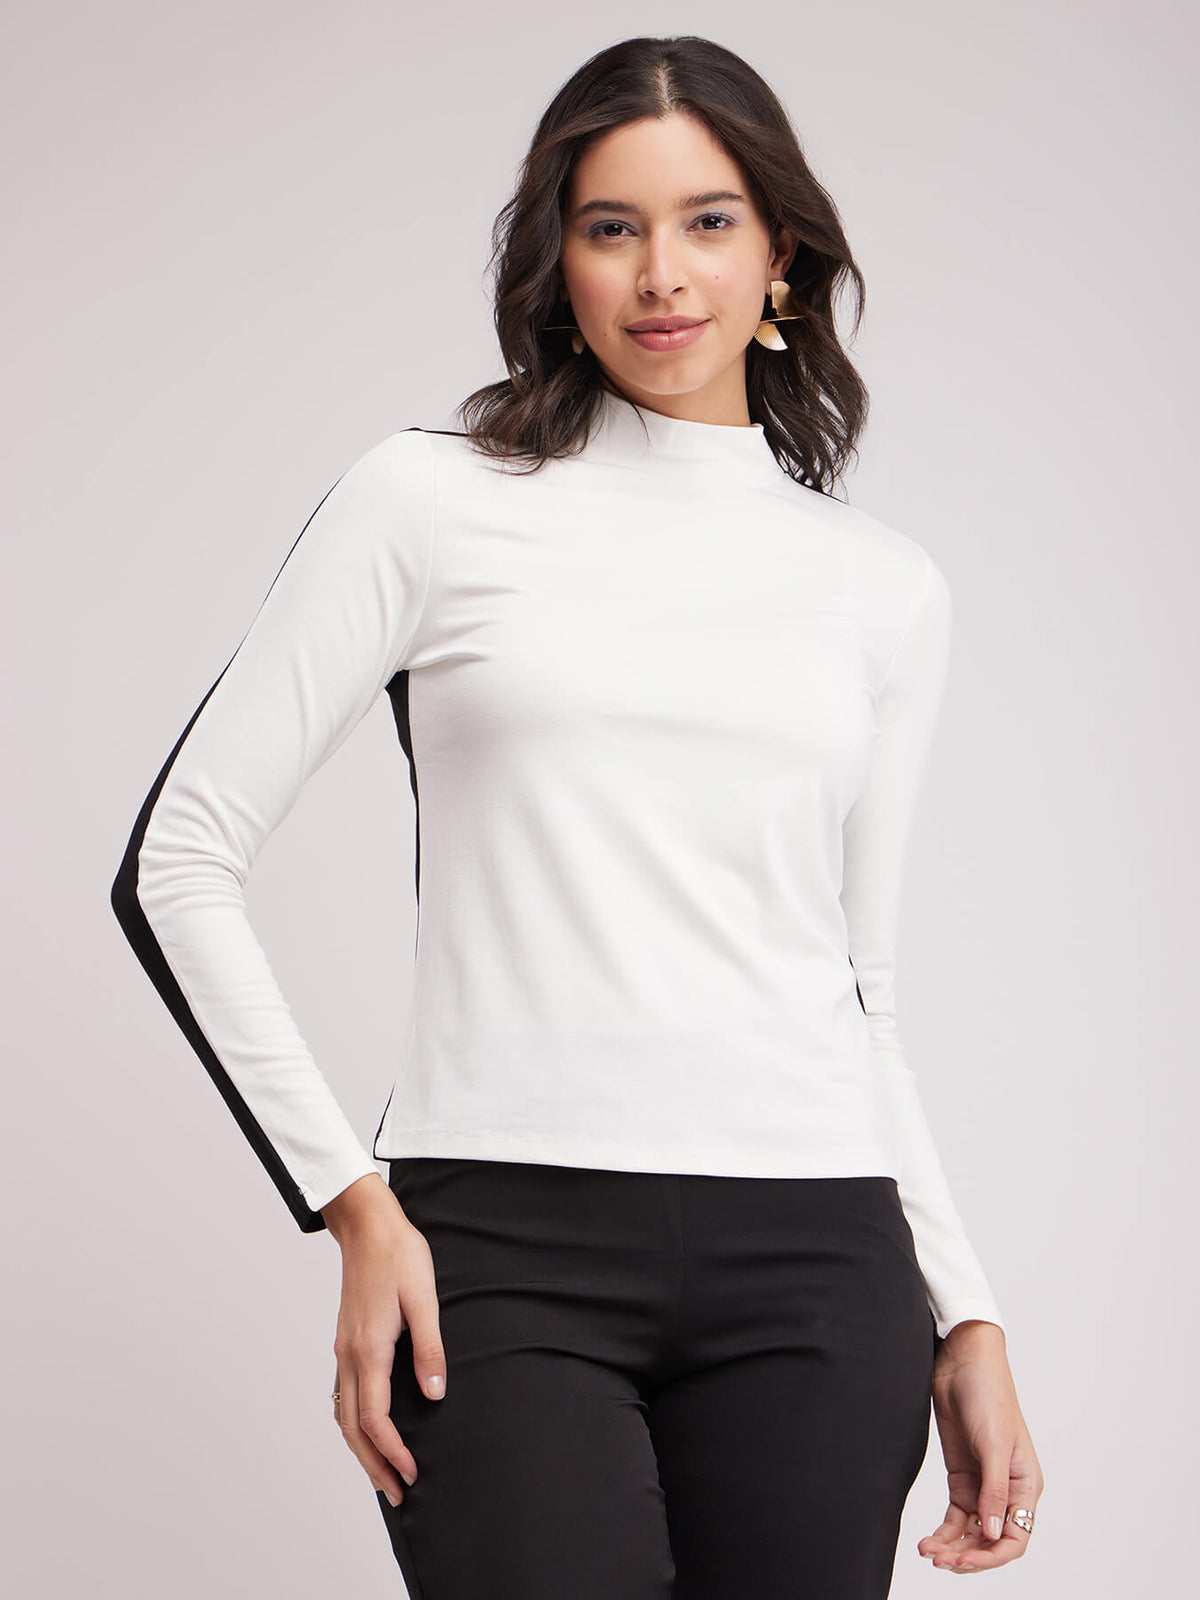 Colour Block High Neck Top - White And Black